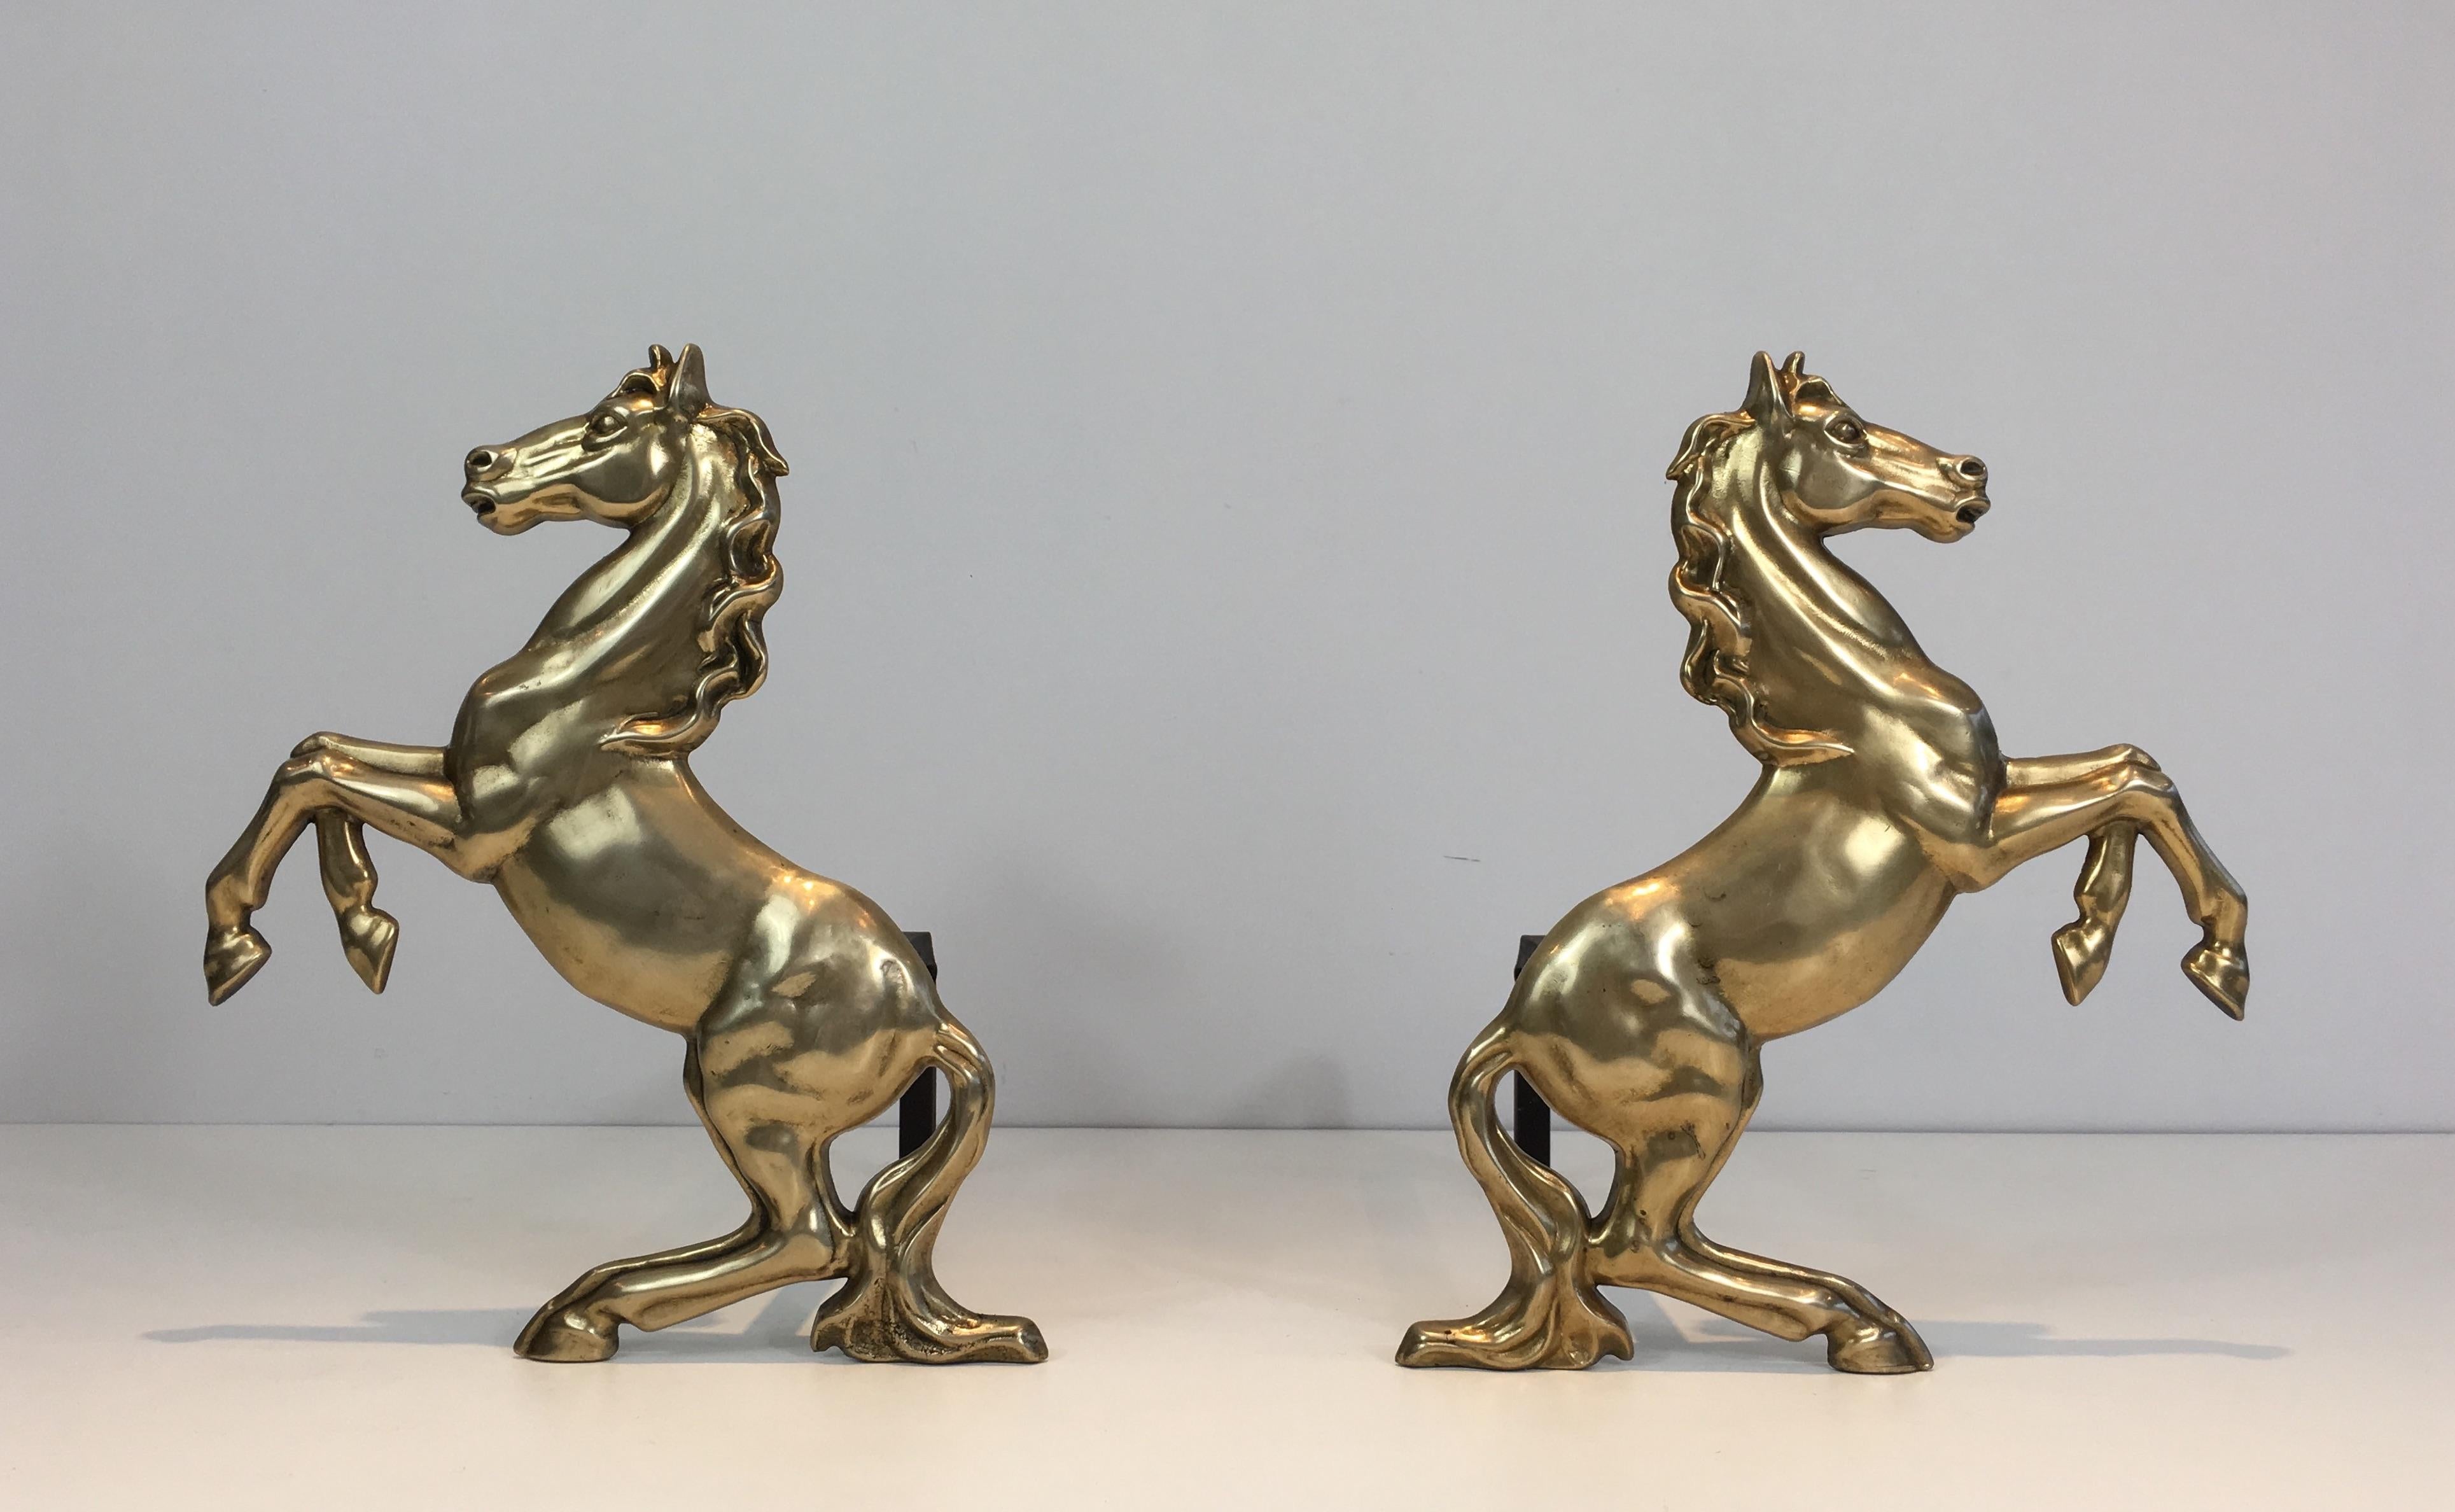 This pair of andirons is made of brass. They are showing prancing horses. This a French work, circa 1970.